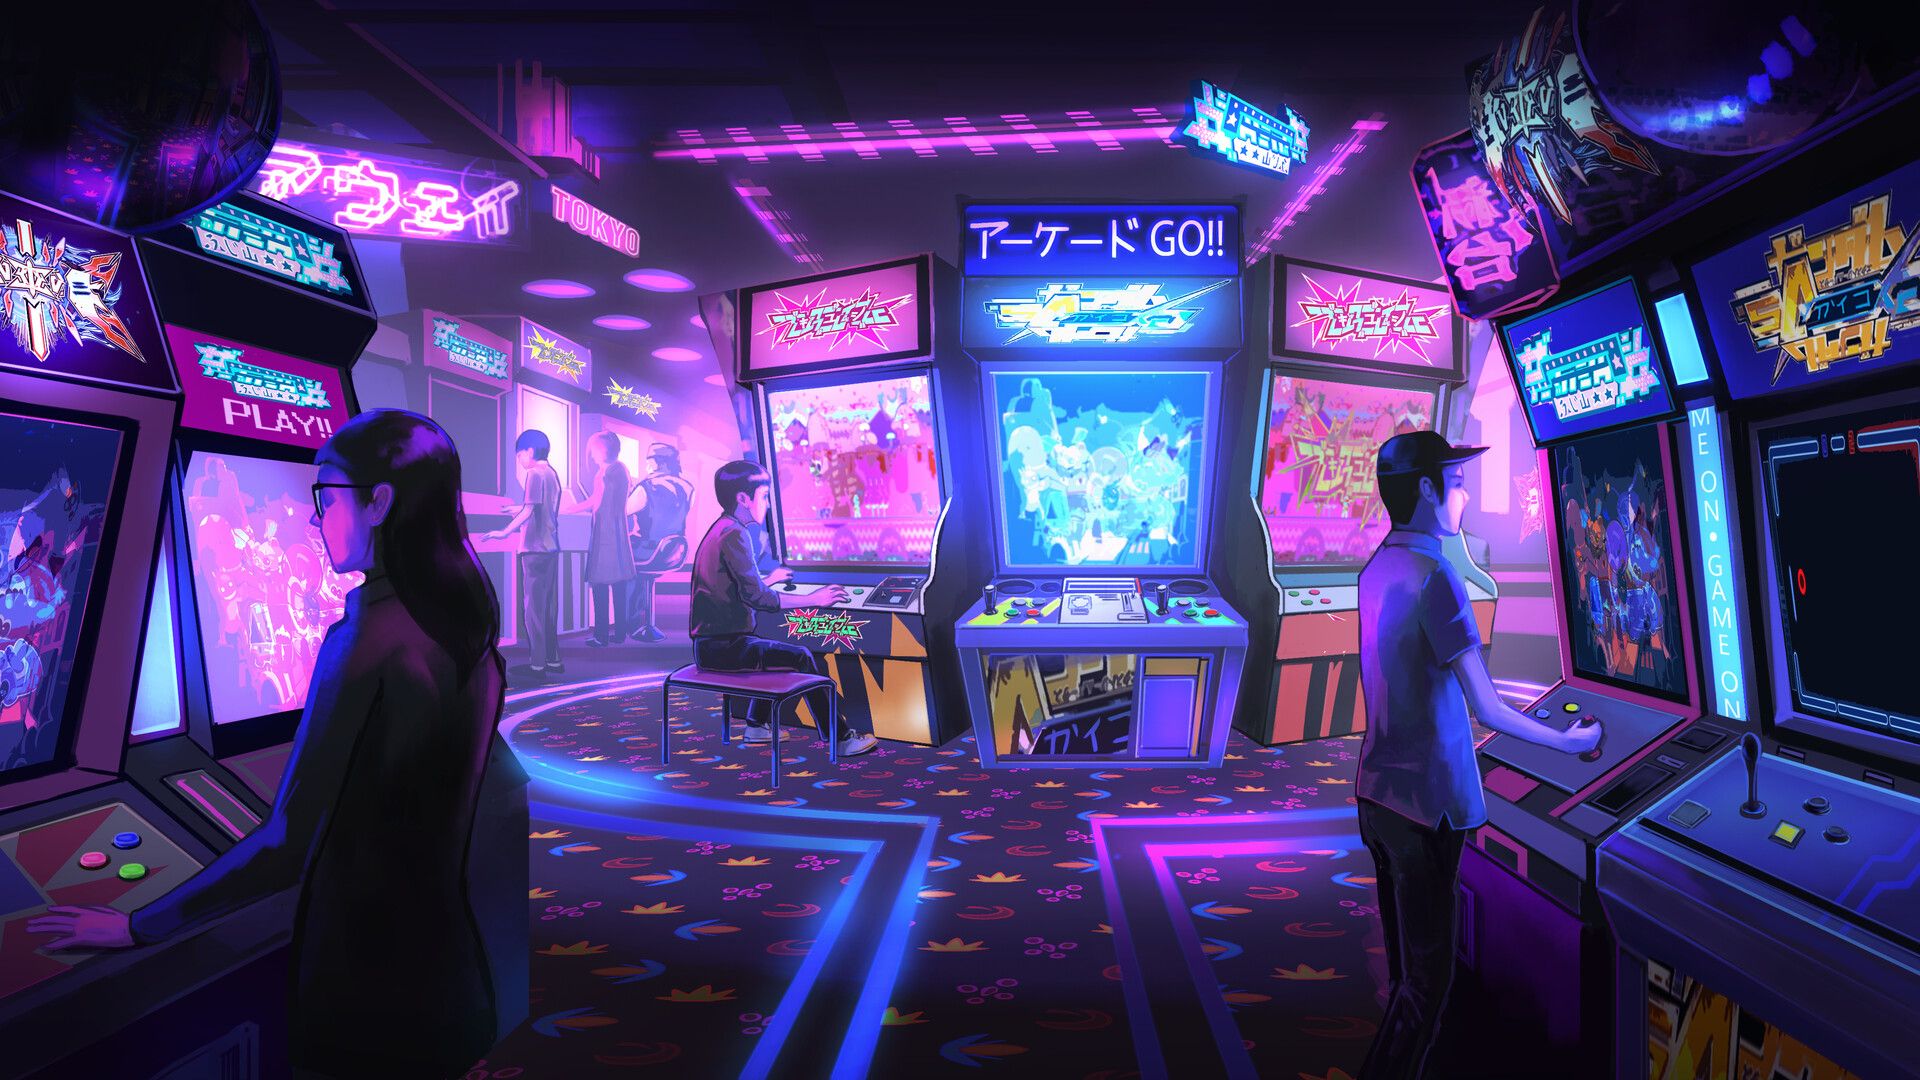 An arcade with neon lights and games - Arcade